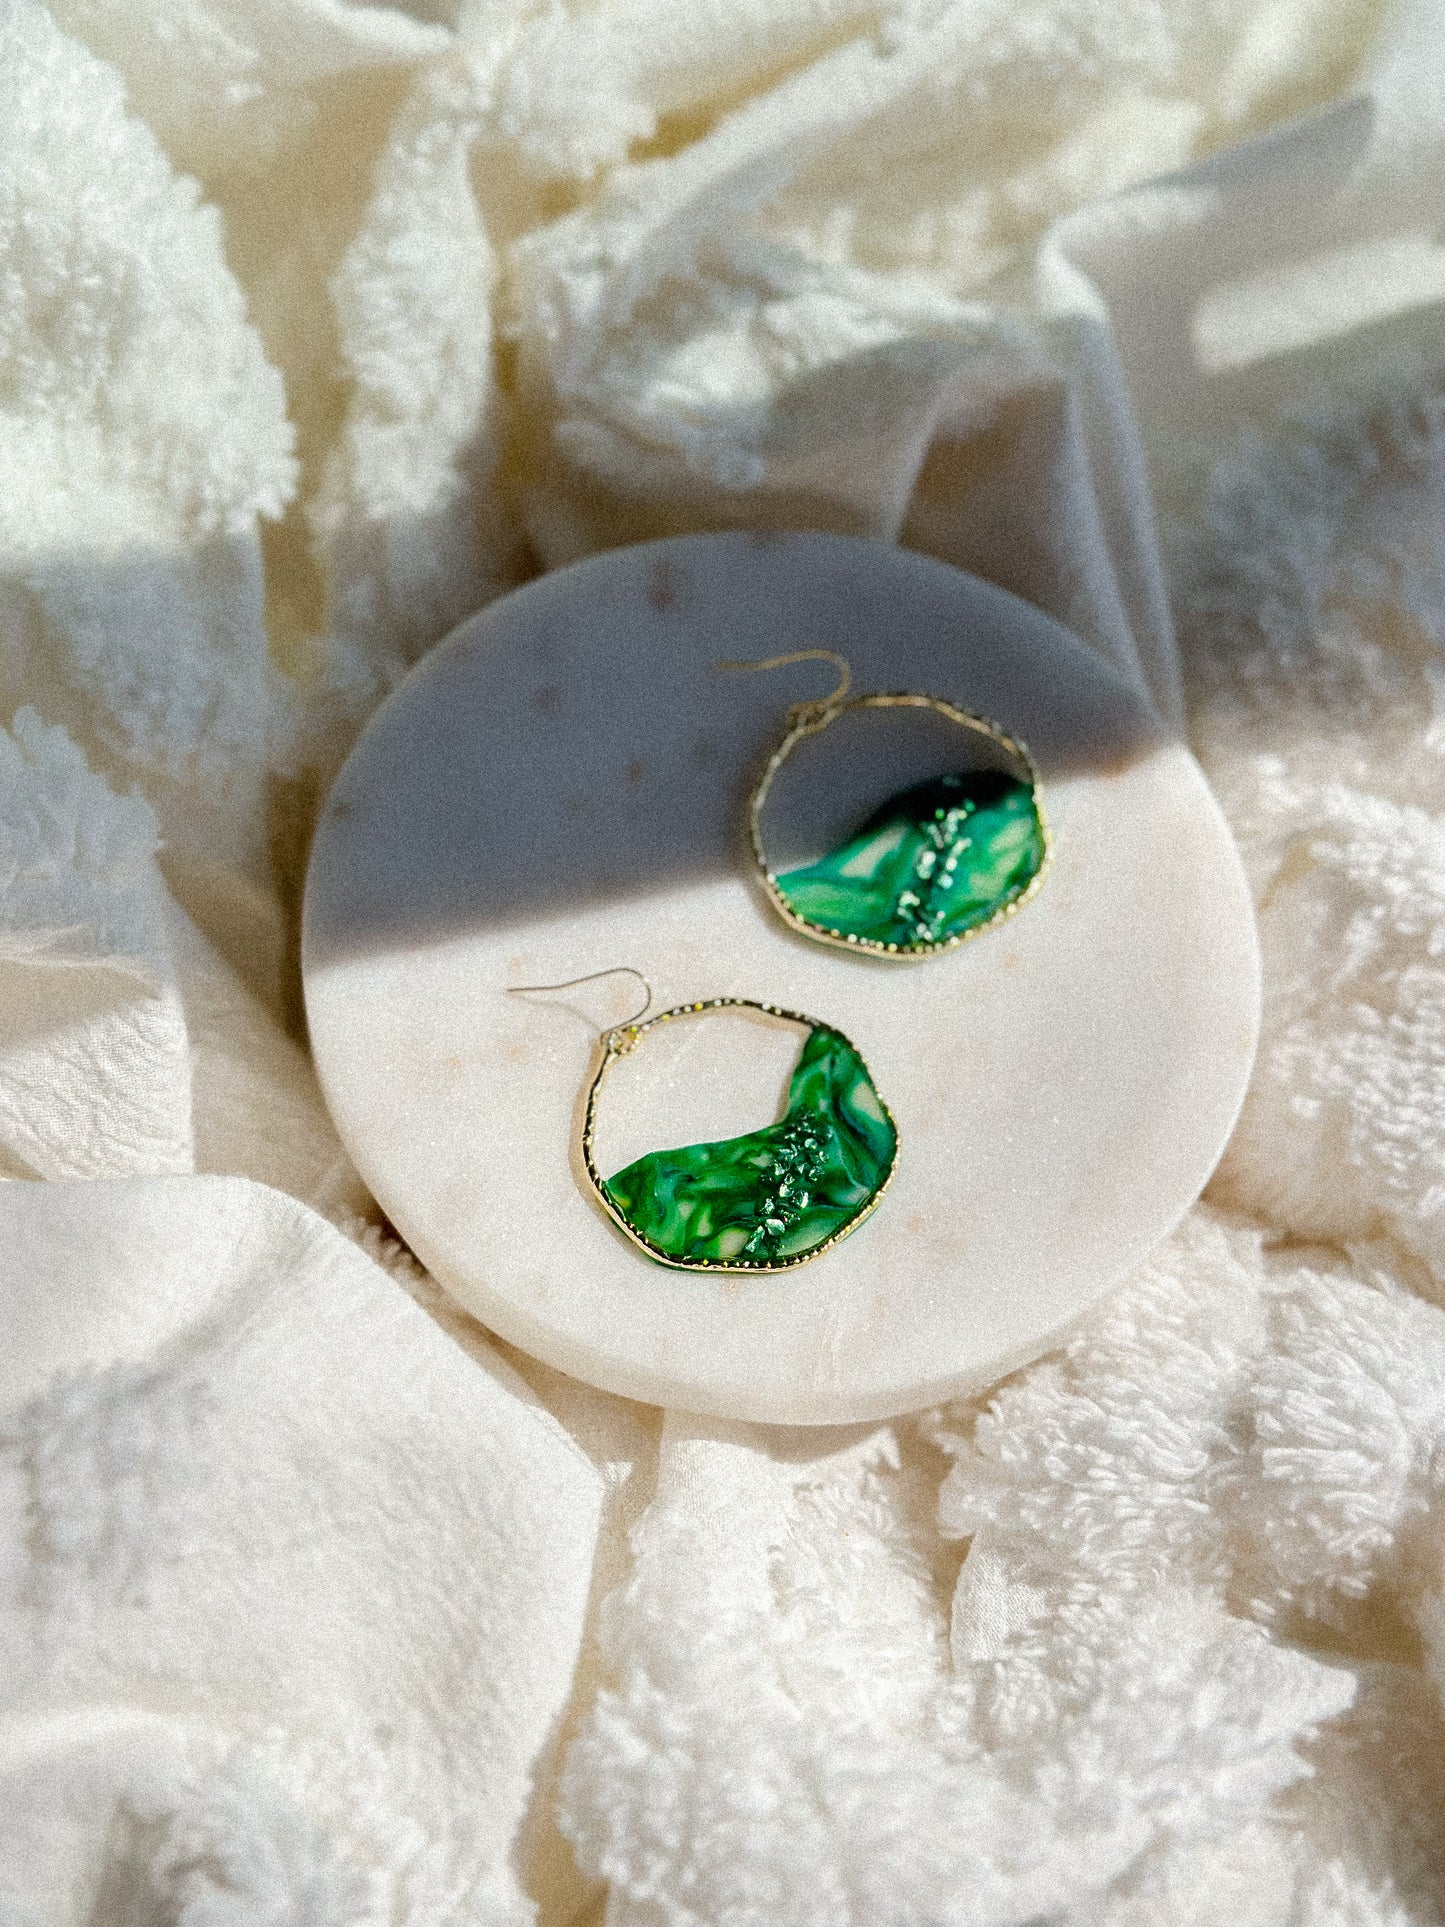 Caladan Green Stained Glass Hoops Earrings